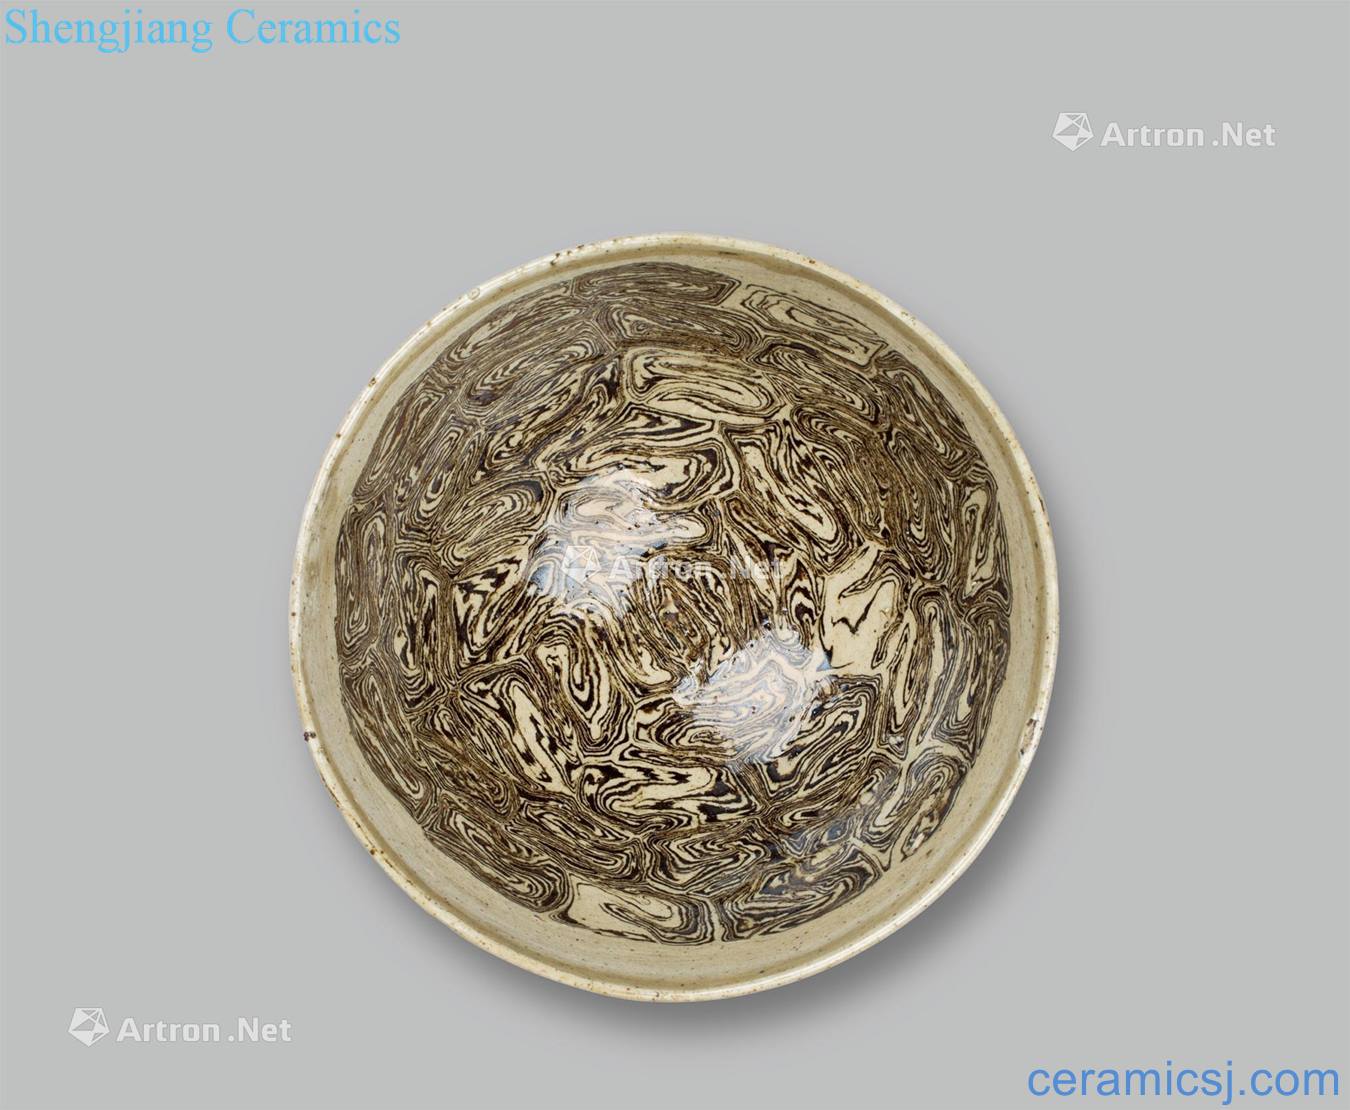 The song dynasty magnetic state kiln twisted placenta bowl